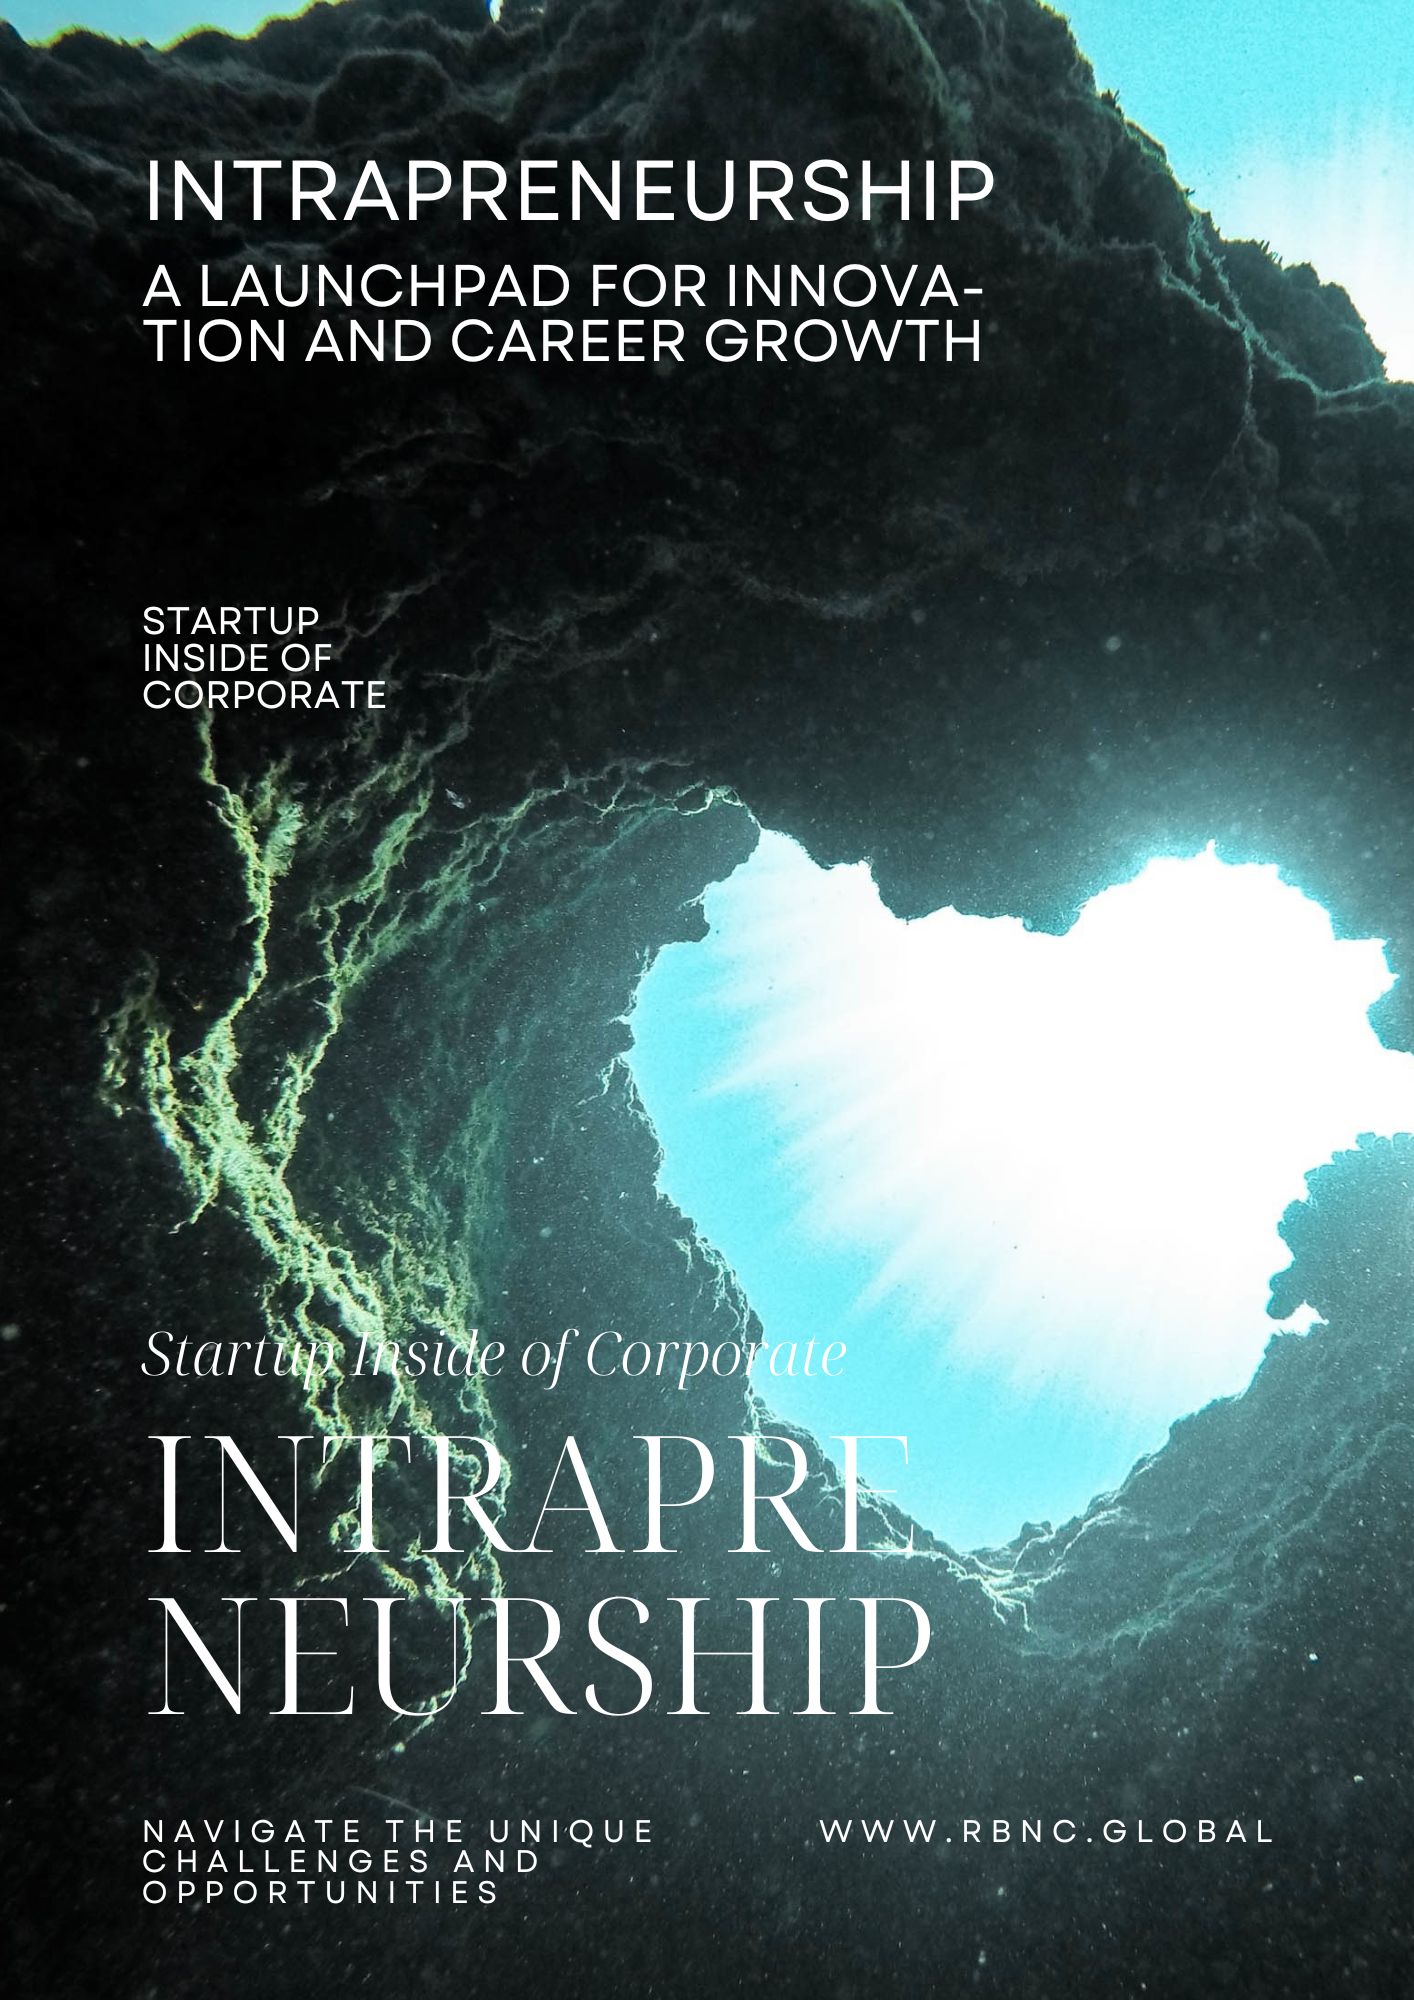 Intrapreneurship: A Launchpad for Innovation and Career Growth